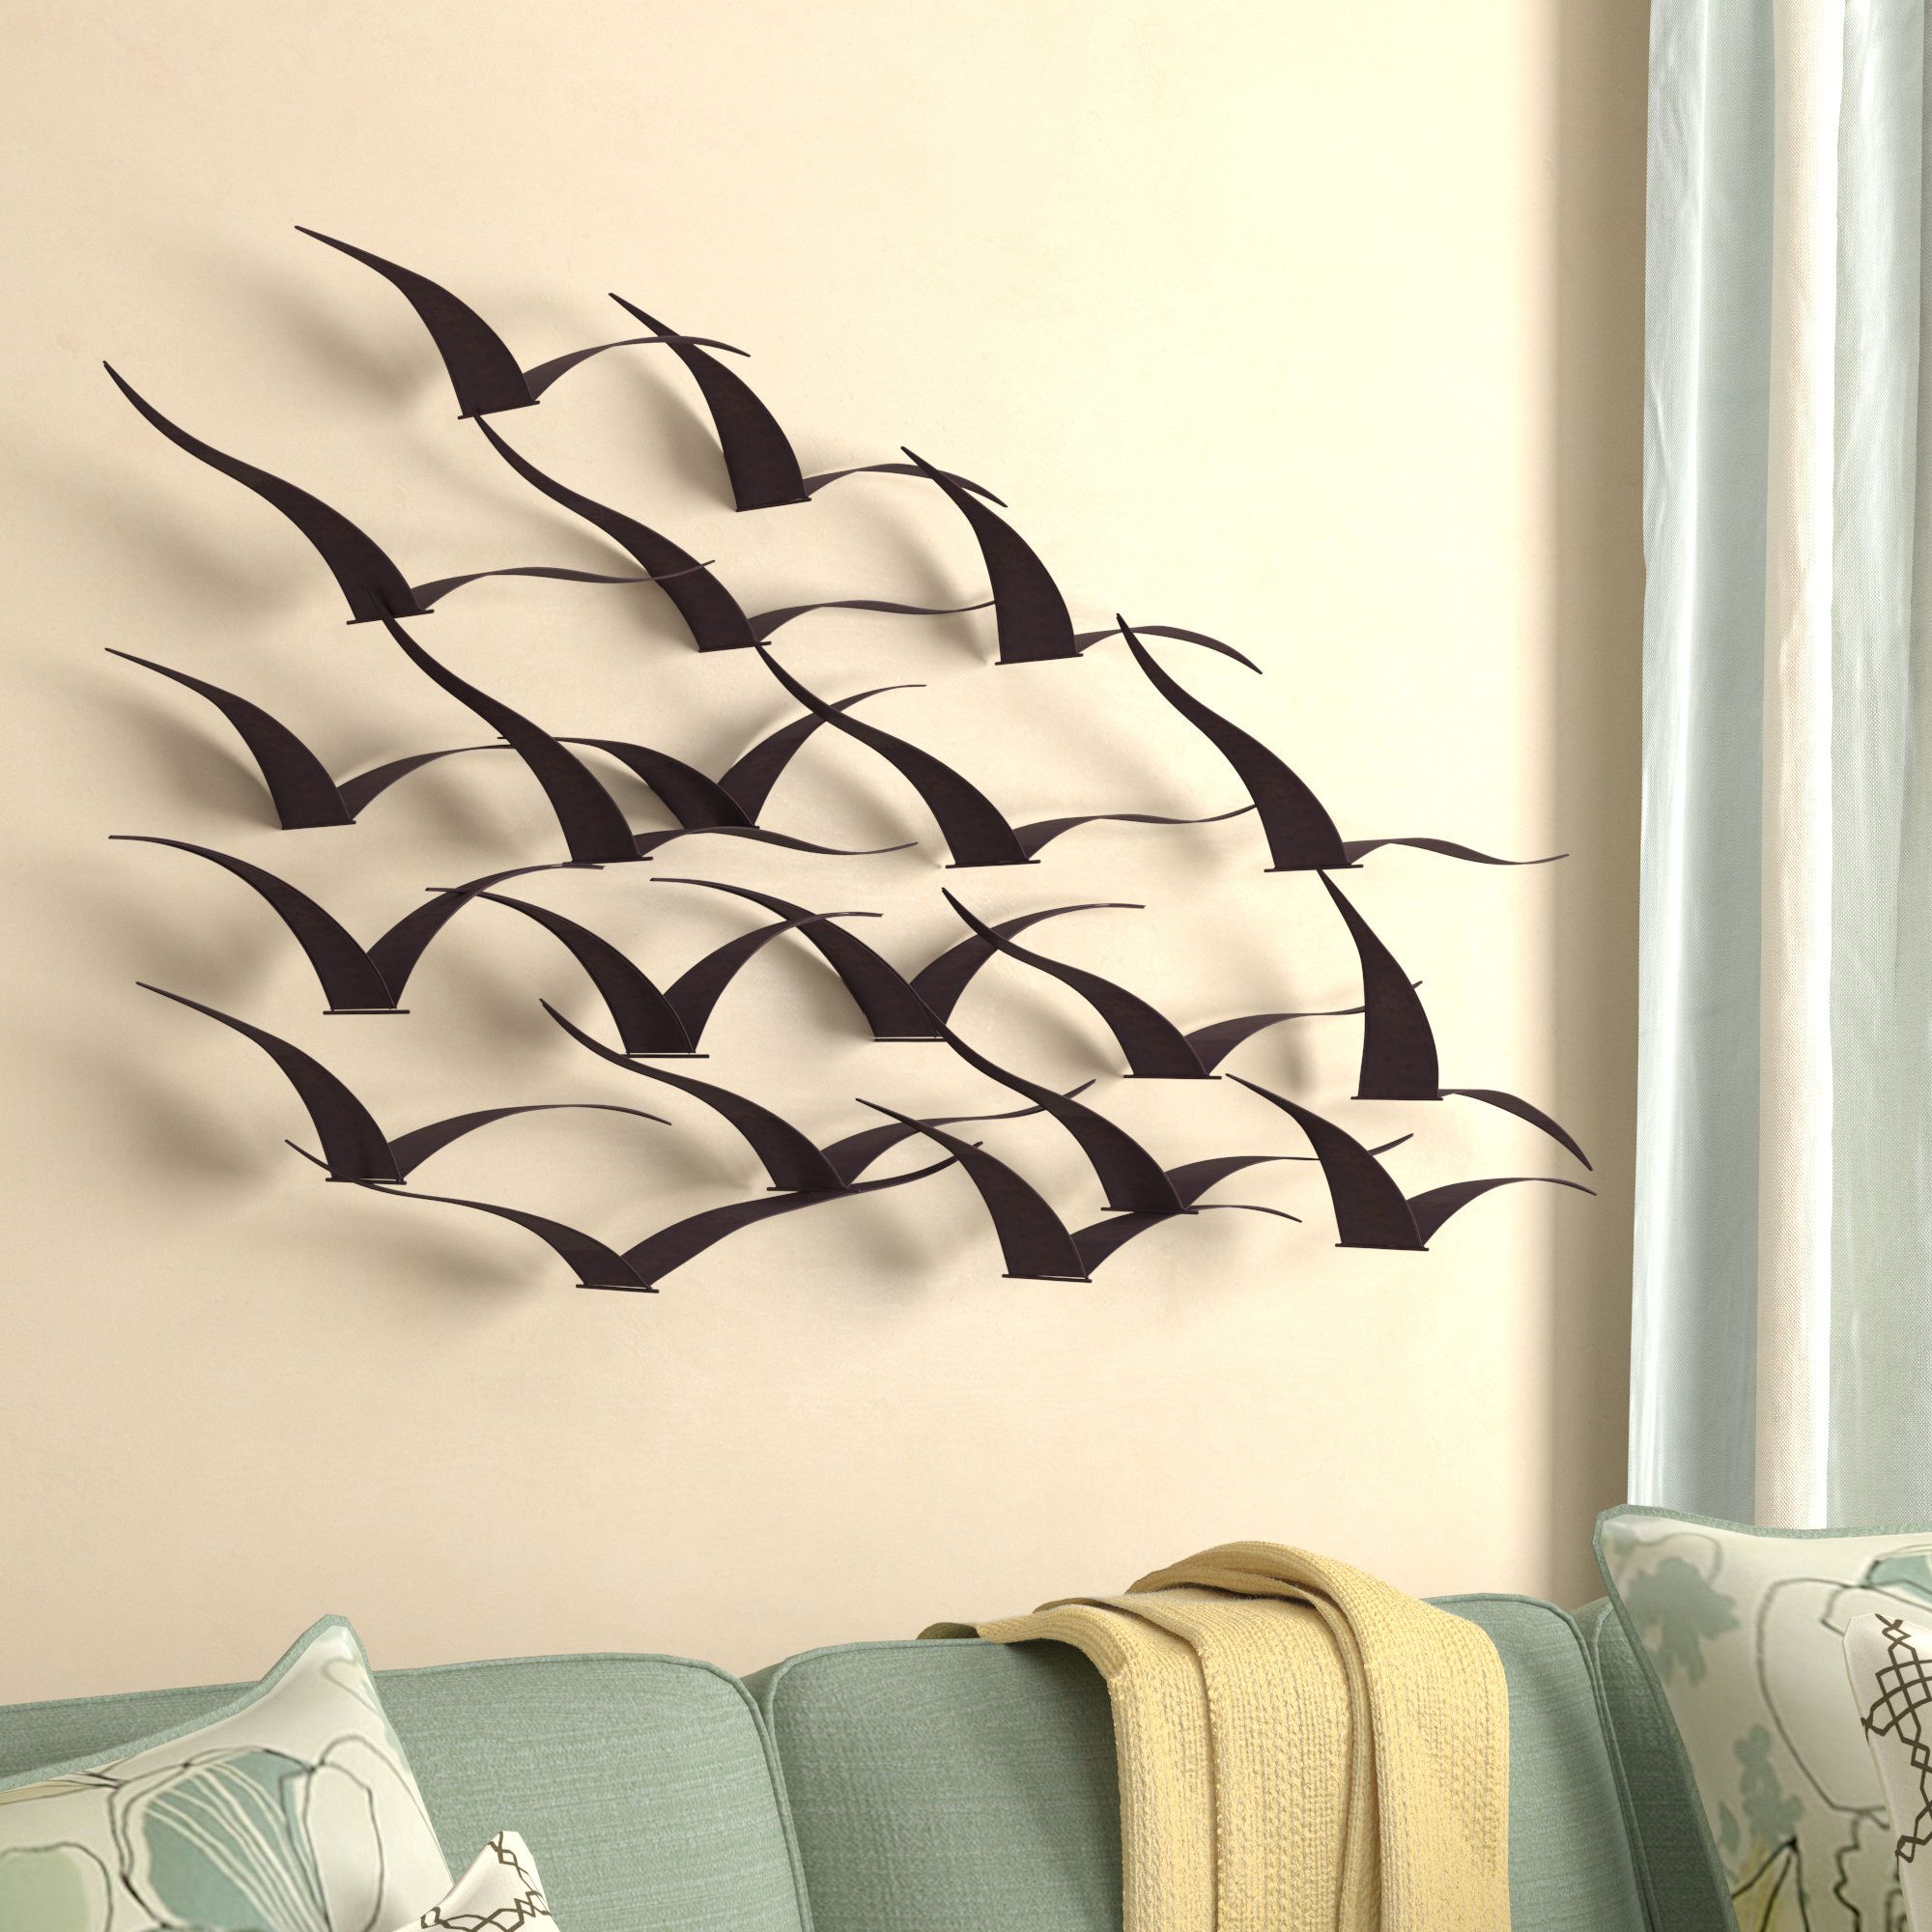 Metal Bird Wall Decor You'll Love In 2021 – Visualhunt With Most Recently Released Large Wall Decor Ornaments (View 9 of 20)